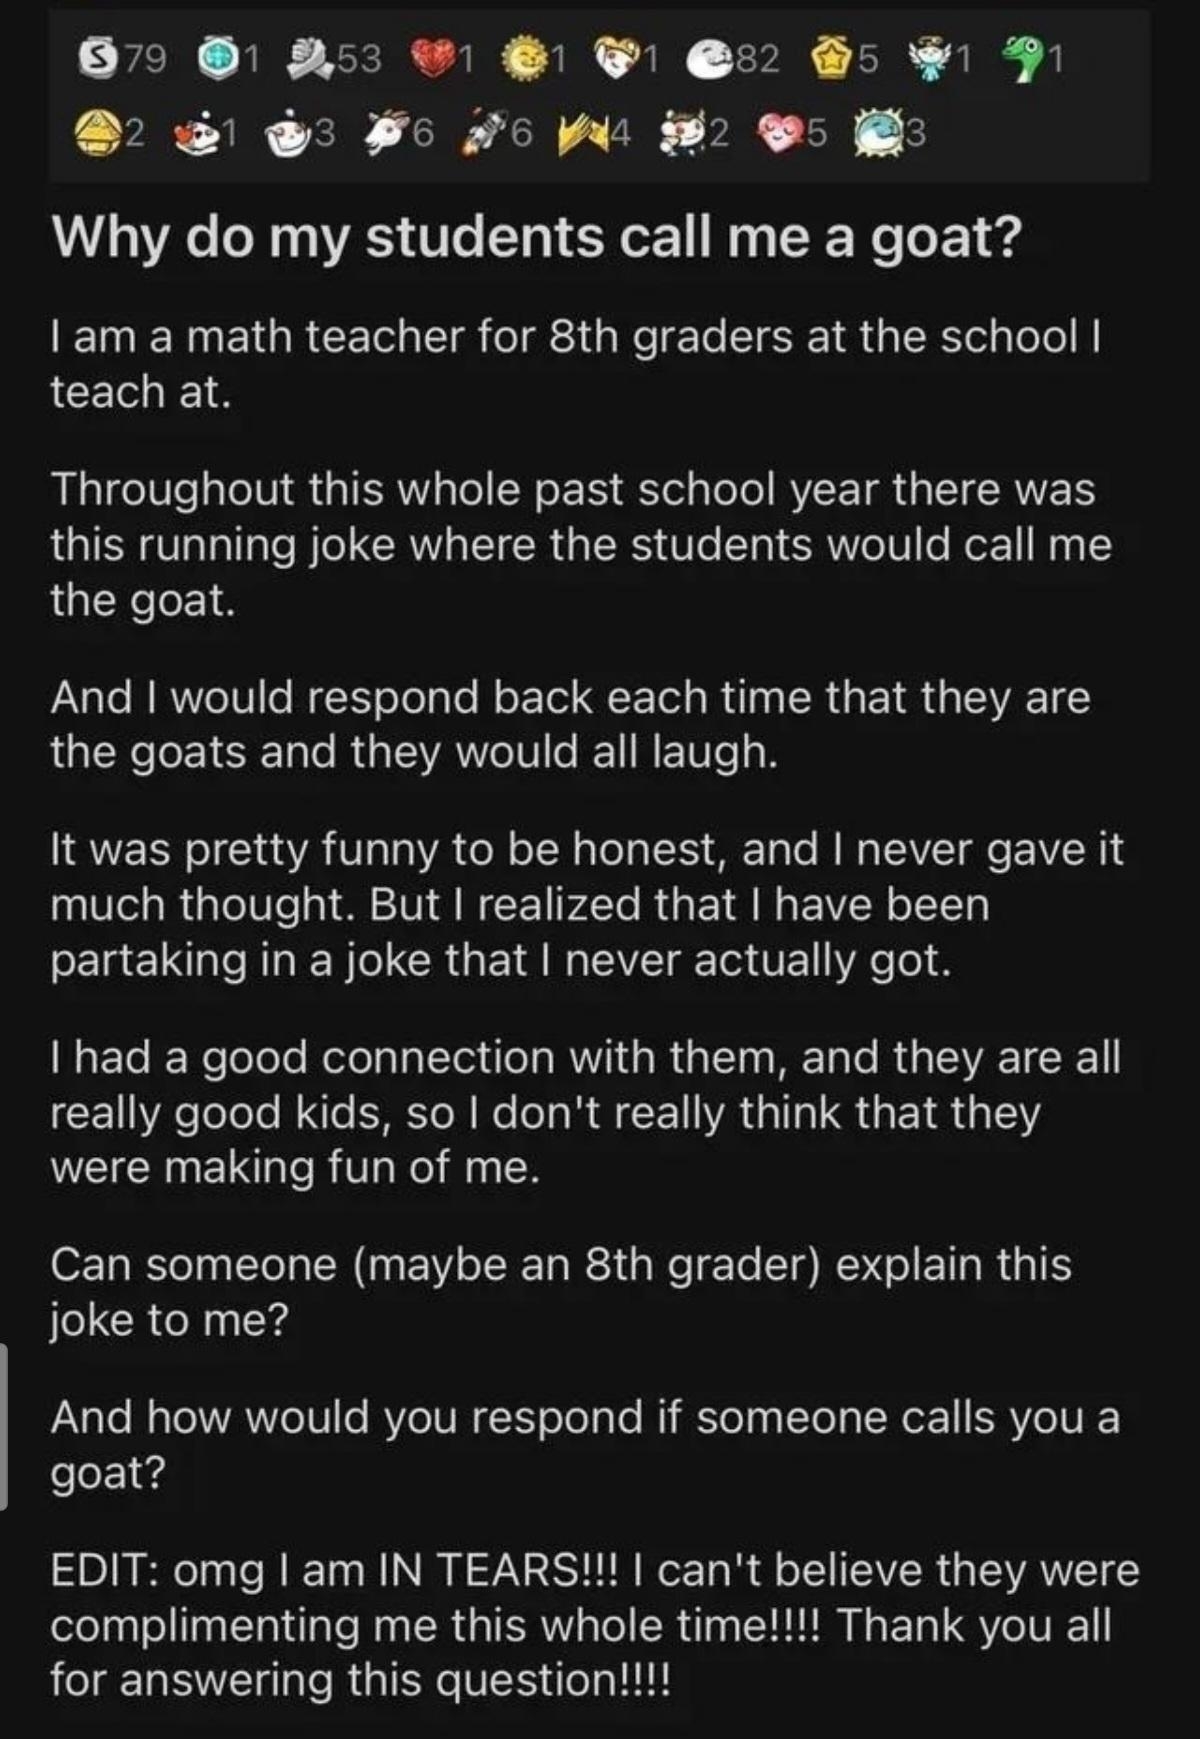 Teacher asks, &quot;Why do my students call me a goat?&quot; because they have a good connection with them and they&#x27;re good kids, and is &quot;in tears&quot; when they realize the students were complimenting them the whole time